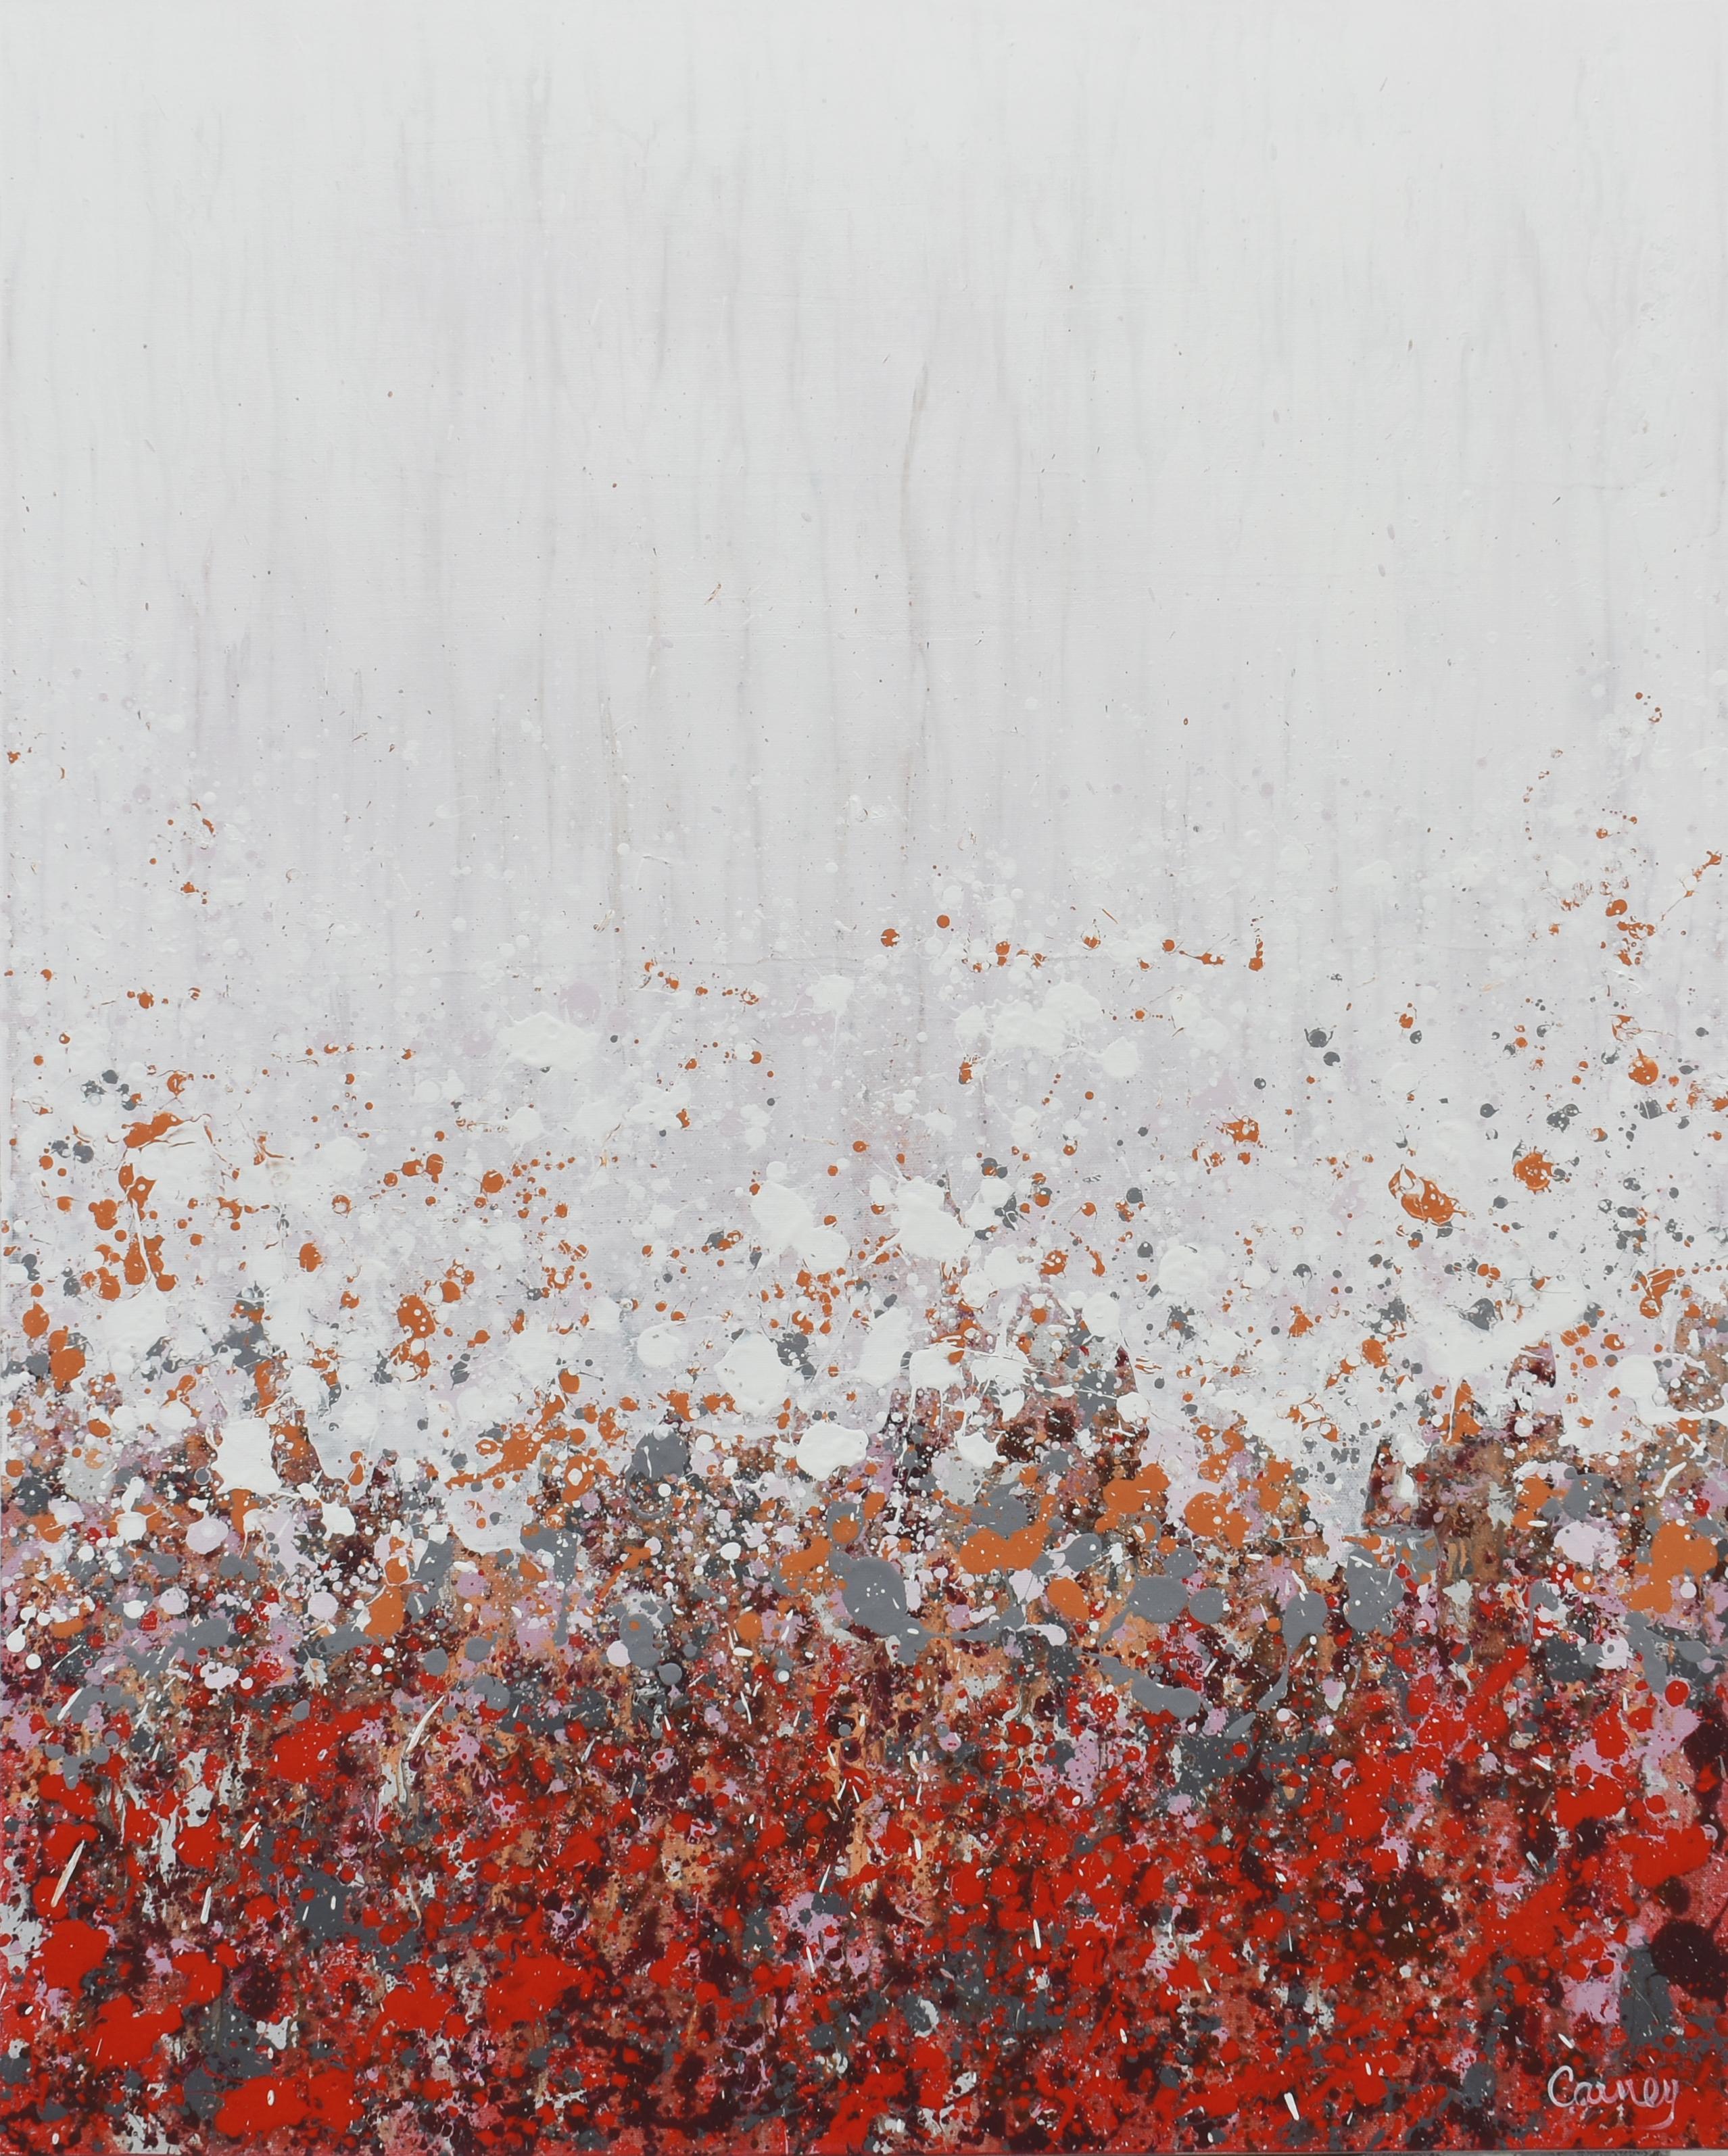 <p>Artist Comments<br />Artist Lisa Carney presents a floral abstract of vibrant crimson blooms. Part of her ongoing GeoFlora series of dynamic abstractions comprised of drips and splatters. The piece features a contrasting palette of red, light